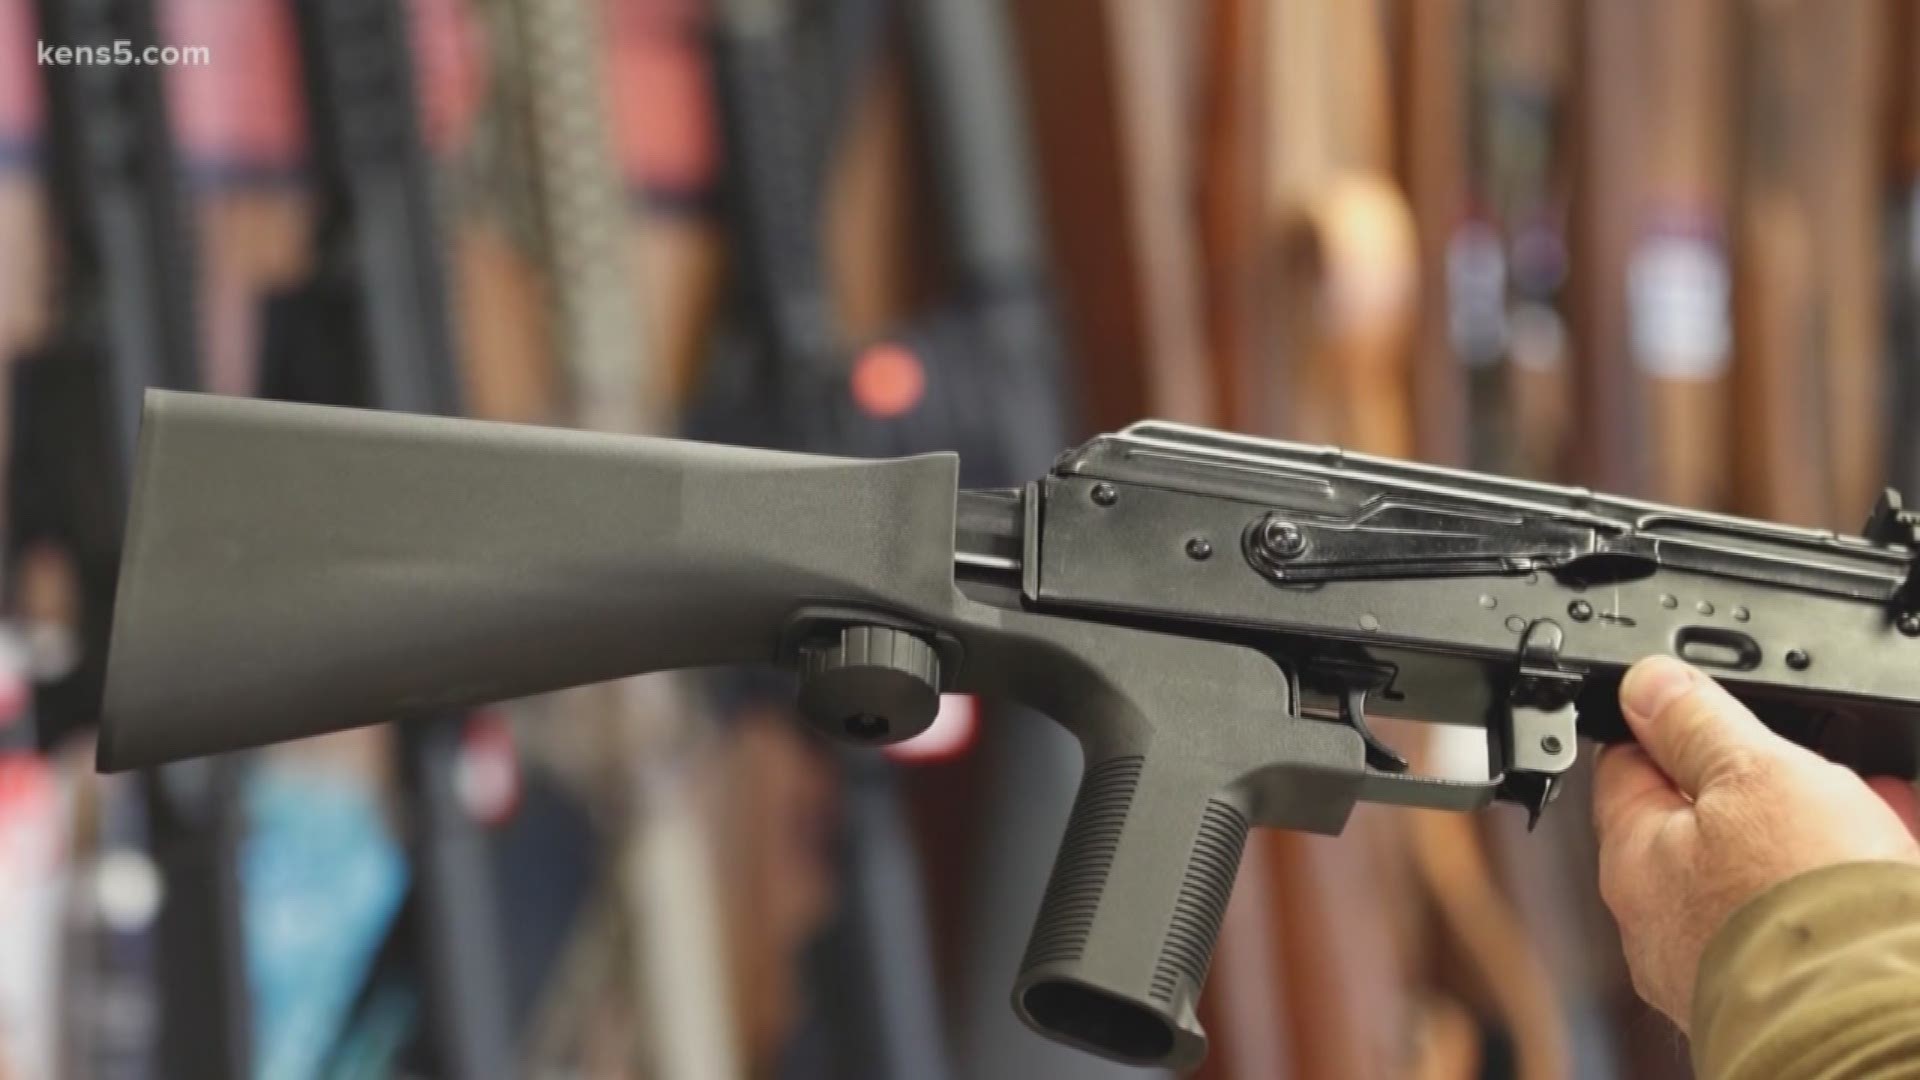 experts-a-3d-printed-firearm-isn-t-as-simple-as-it-sounds-kens5